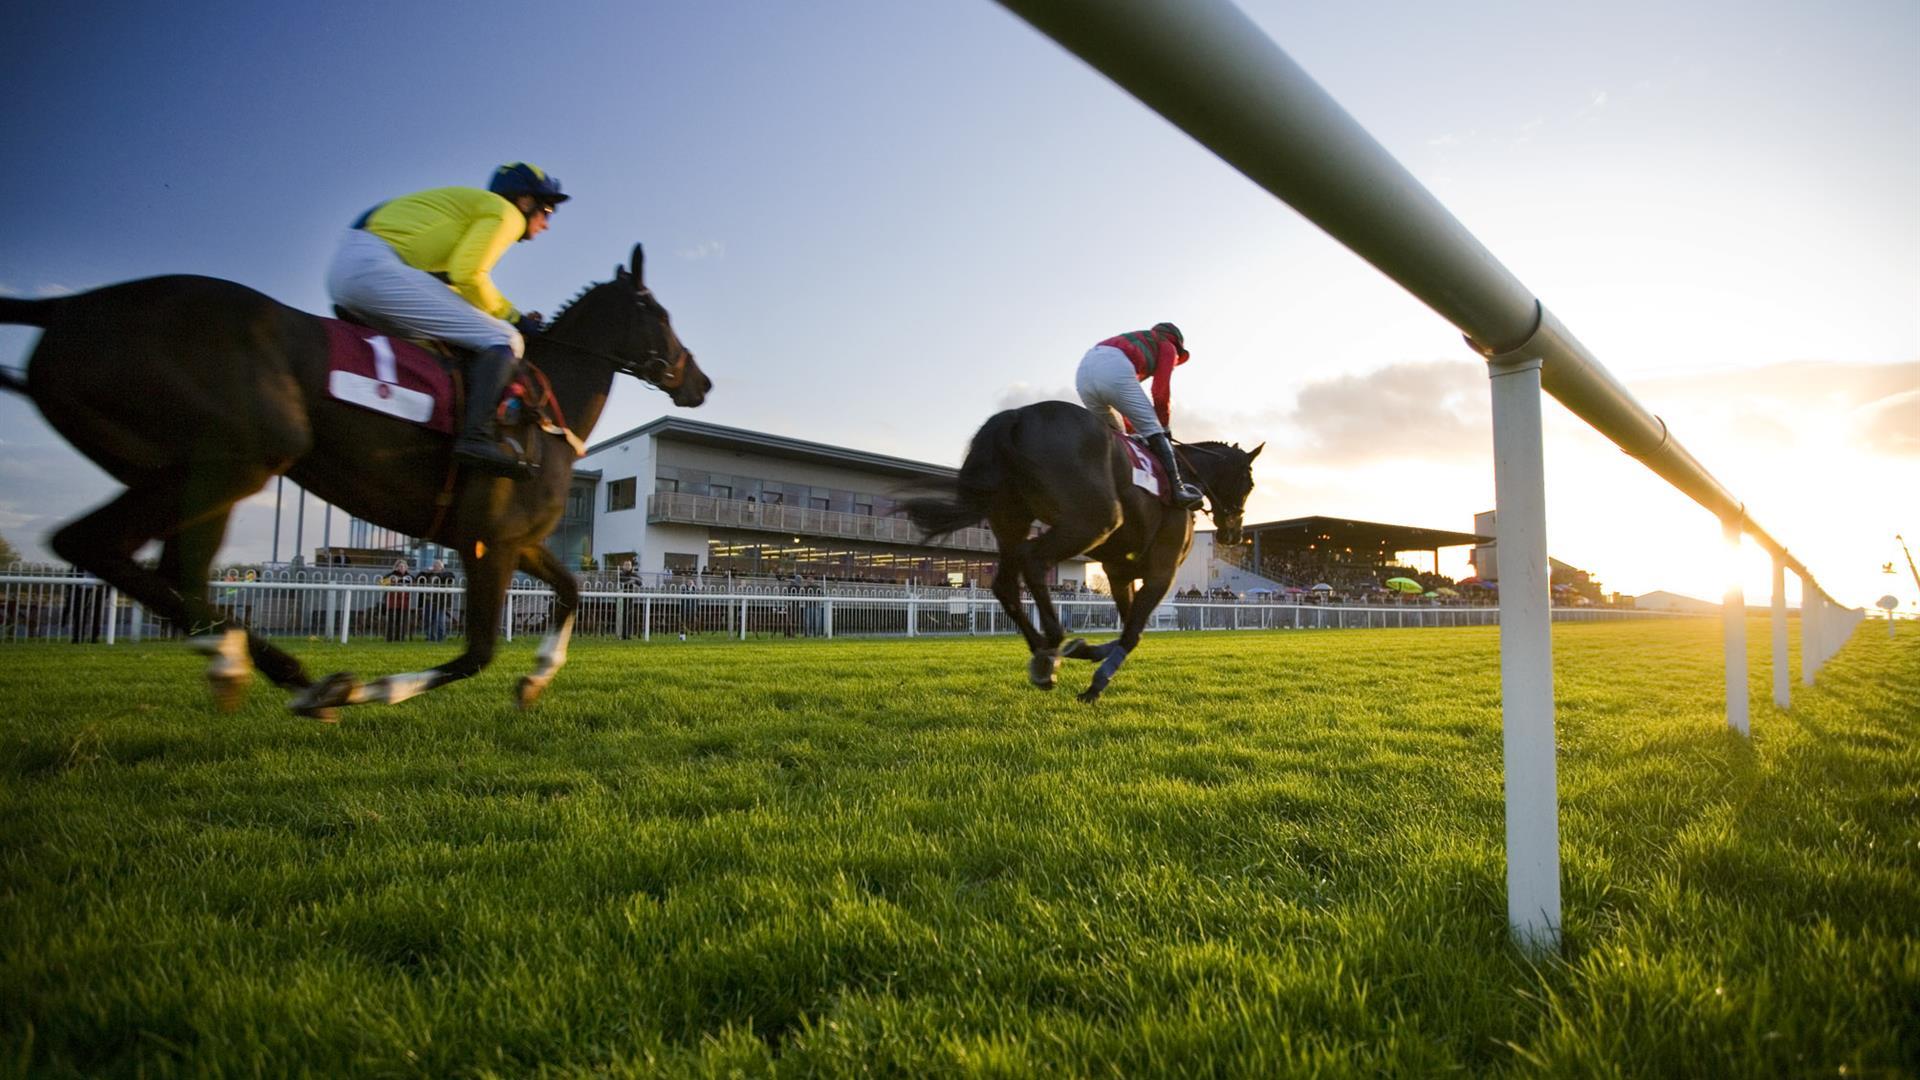 Image is of 2 horses and jockeys racing on the course